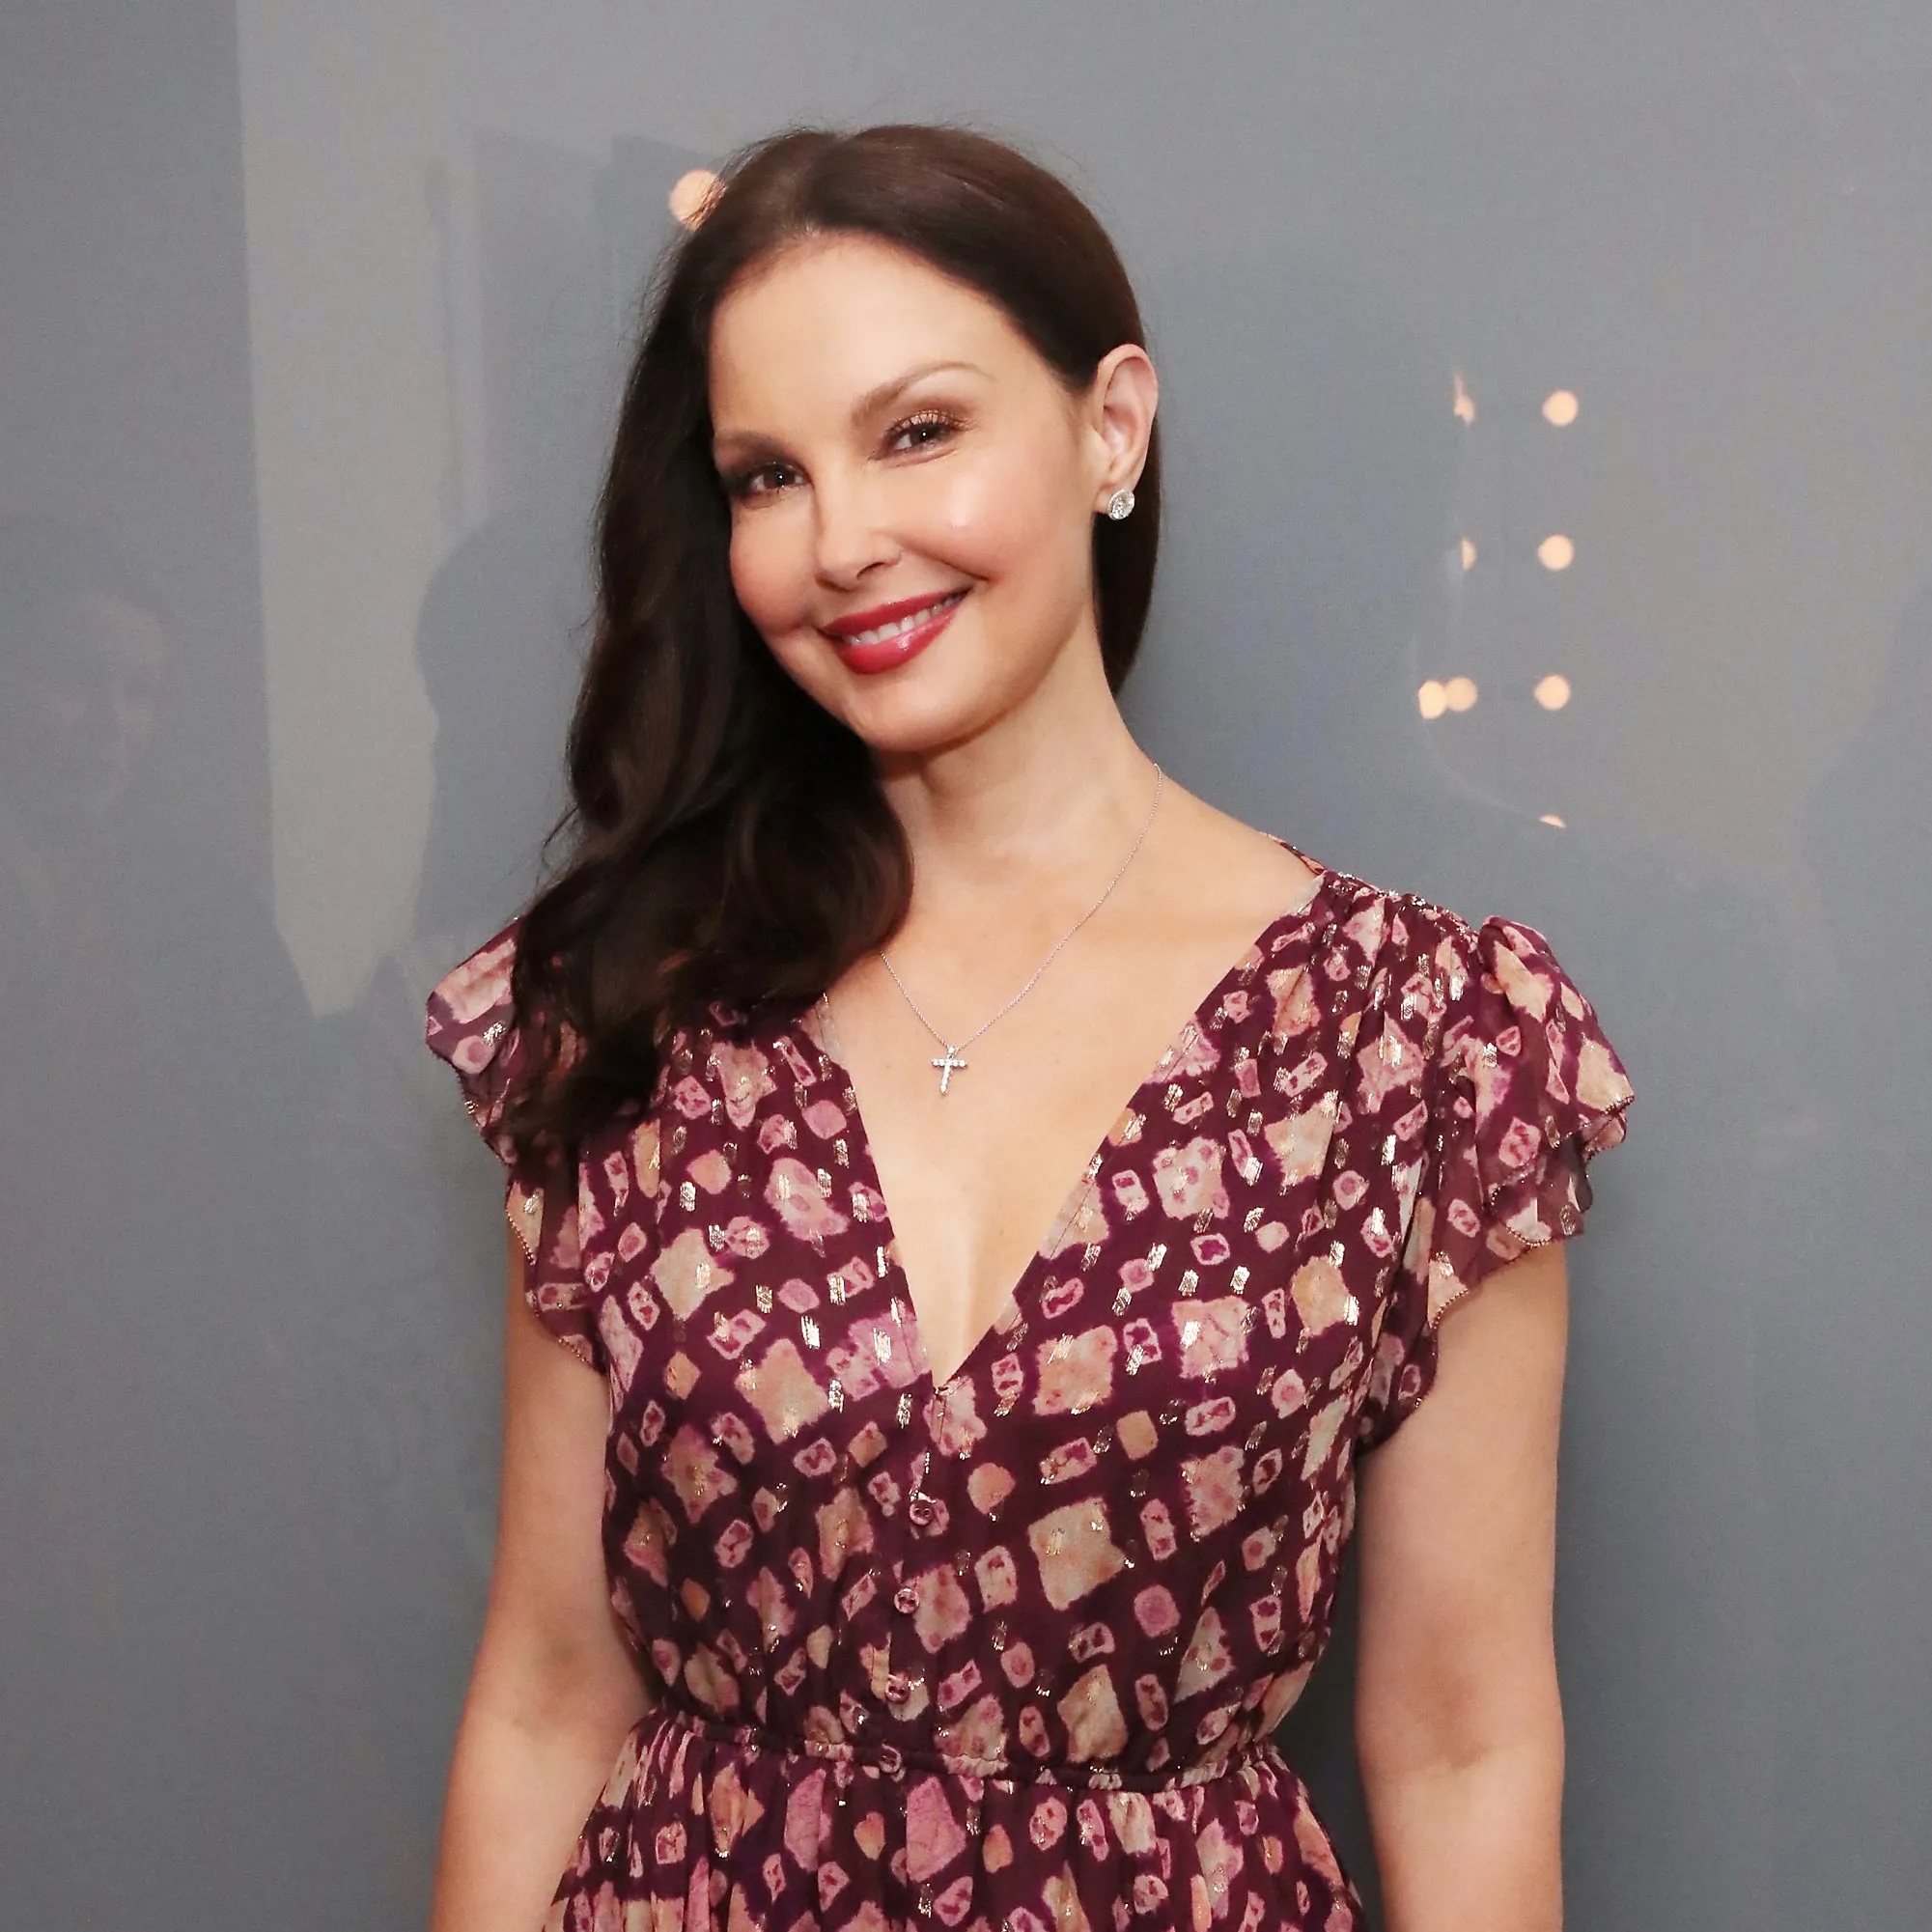 Ashley Judd Movies And TV Shows: Ashley Judd Movies In Order